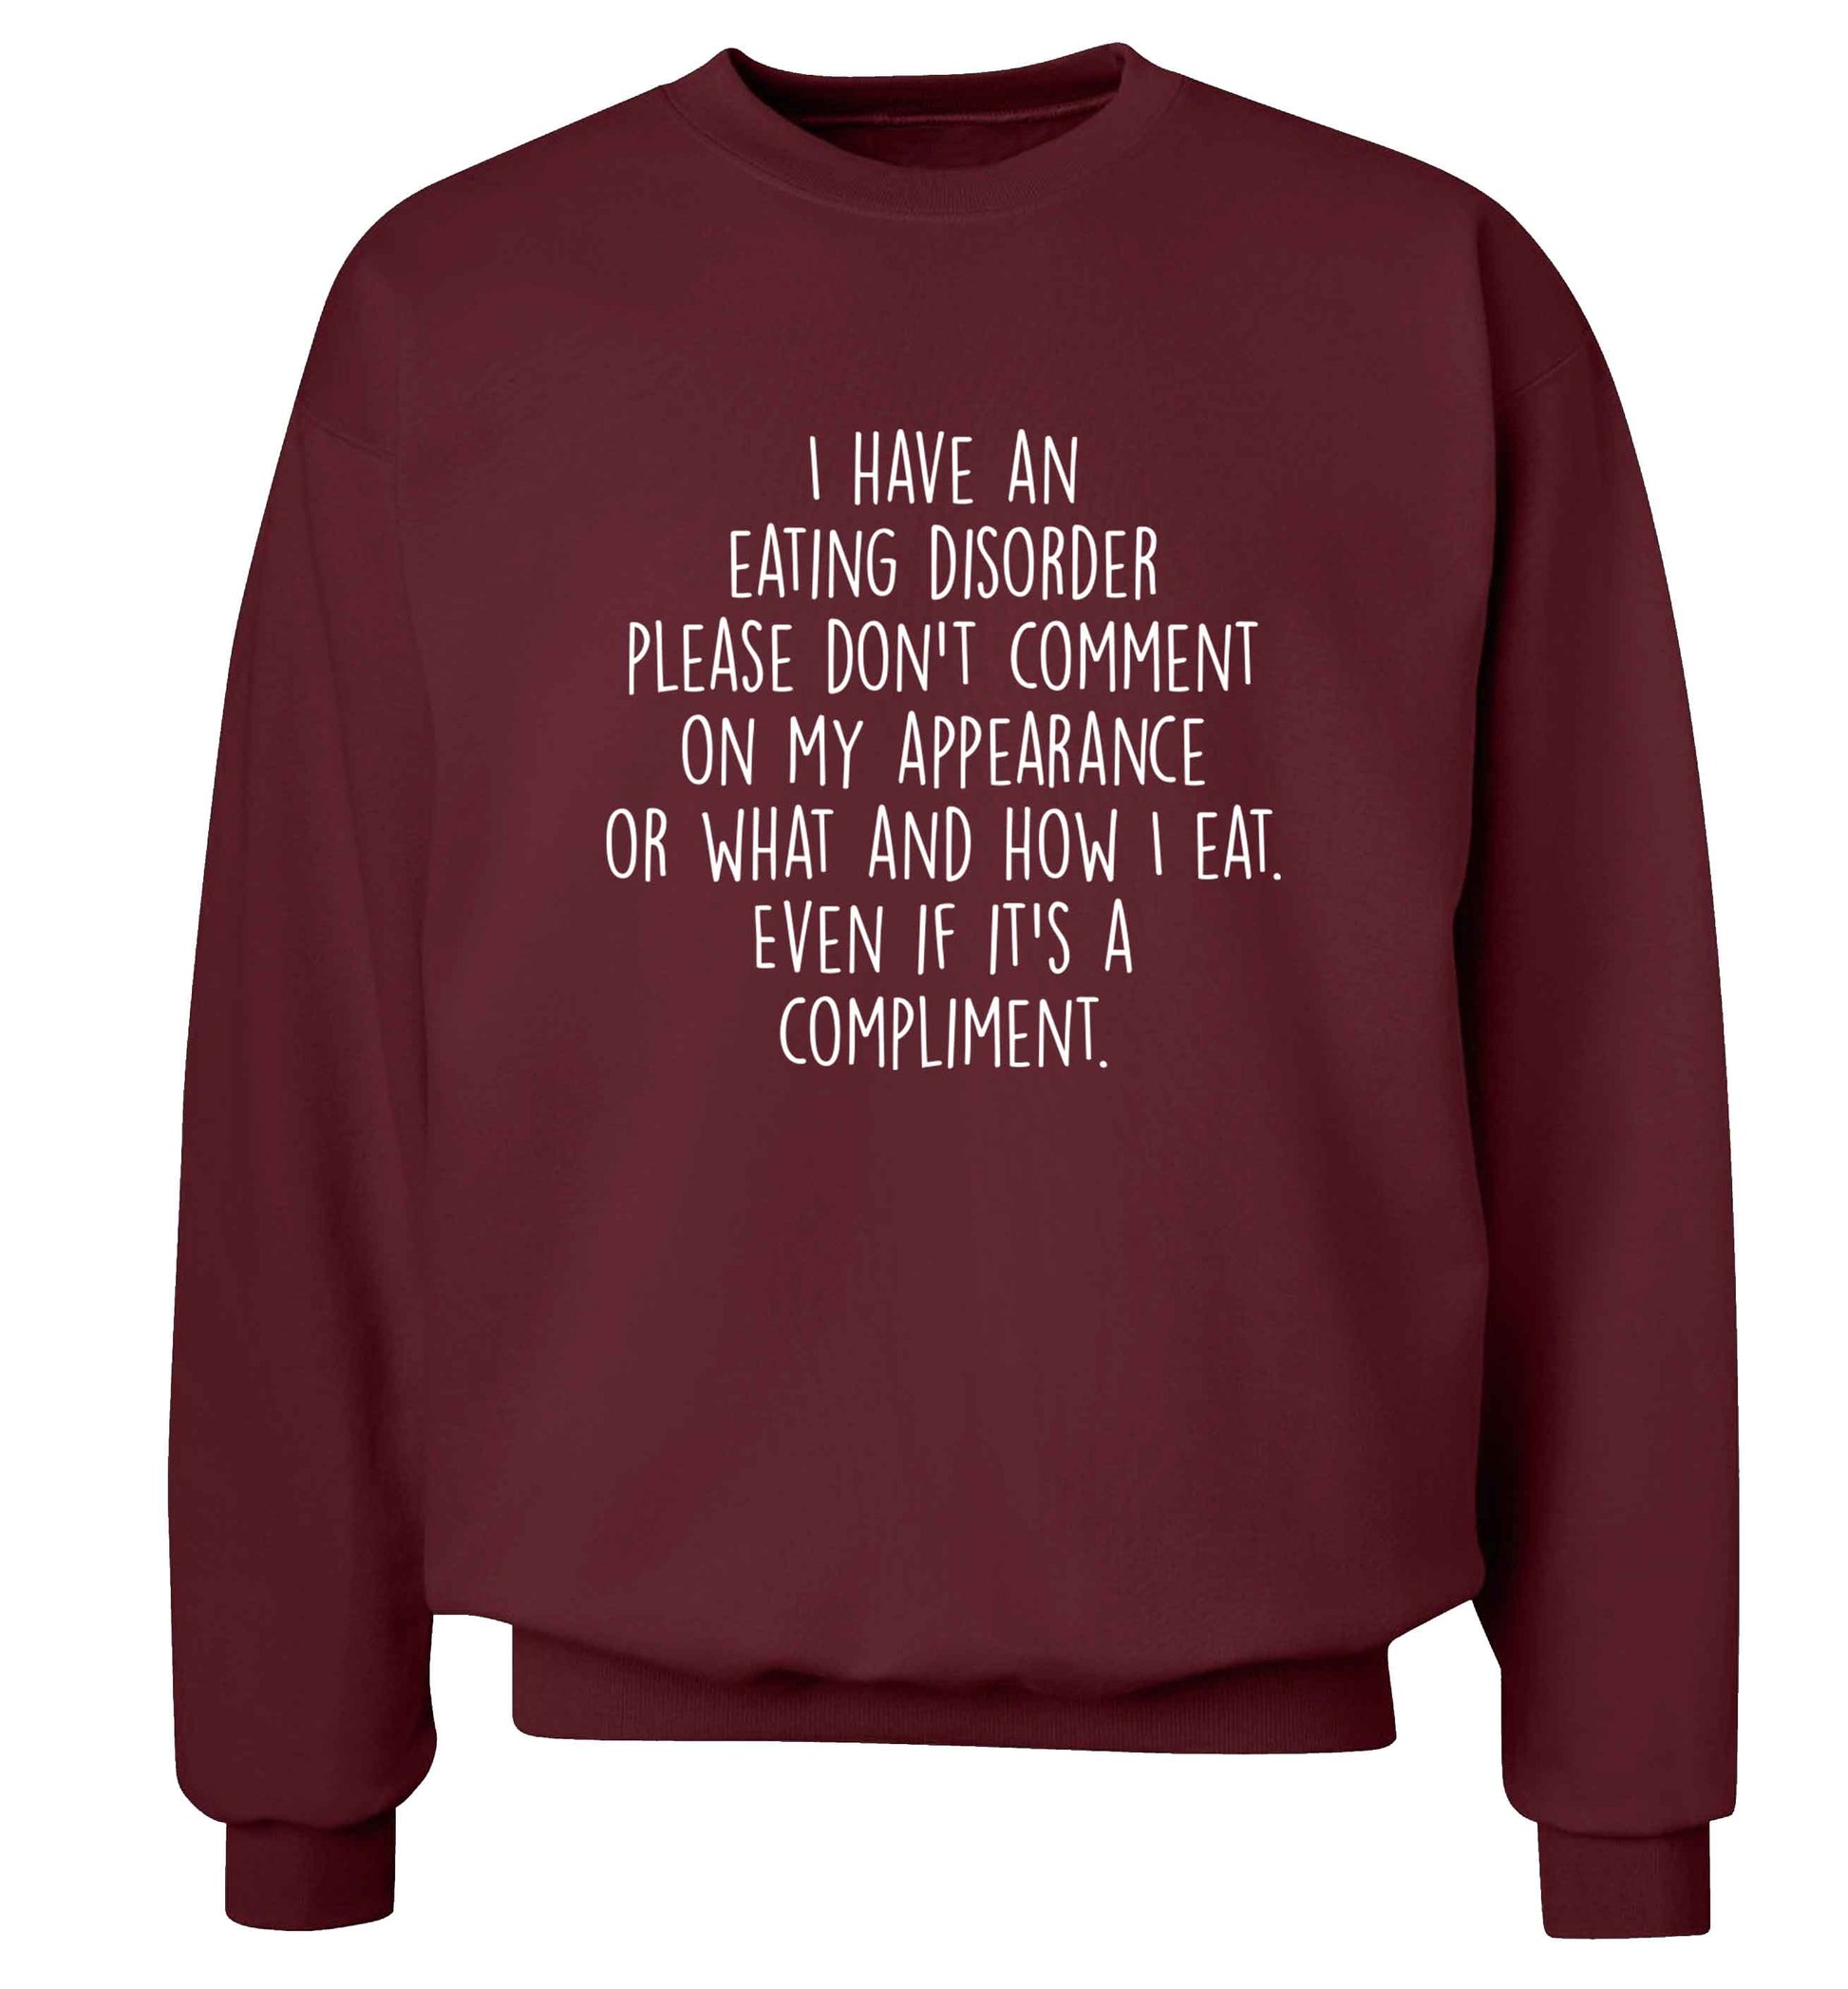 I have an eating disorder please don't comment on my appearance or what and how I eat. Even if it's a compliment adult's unisex maroon sweater 2XL